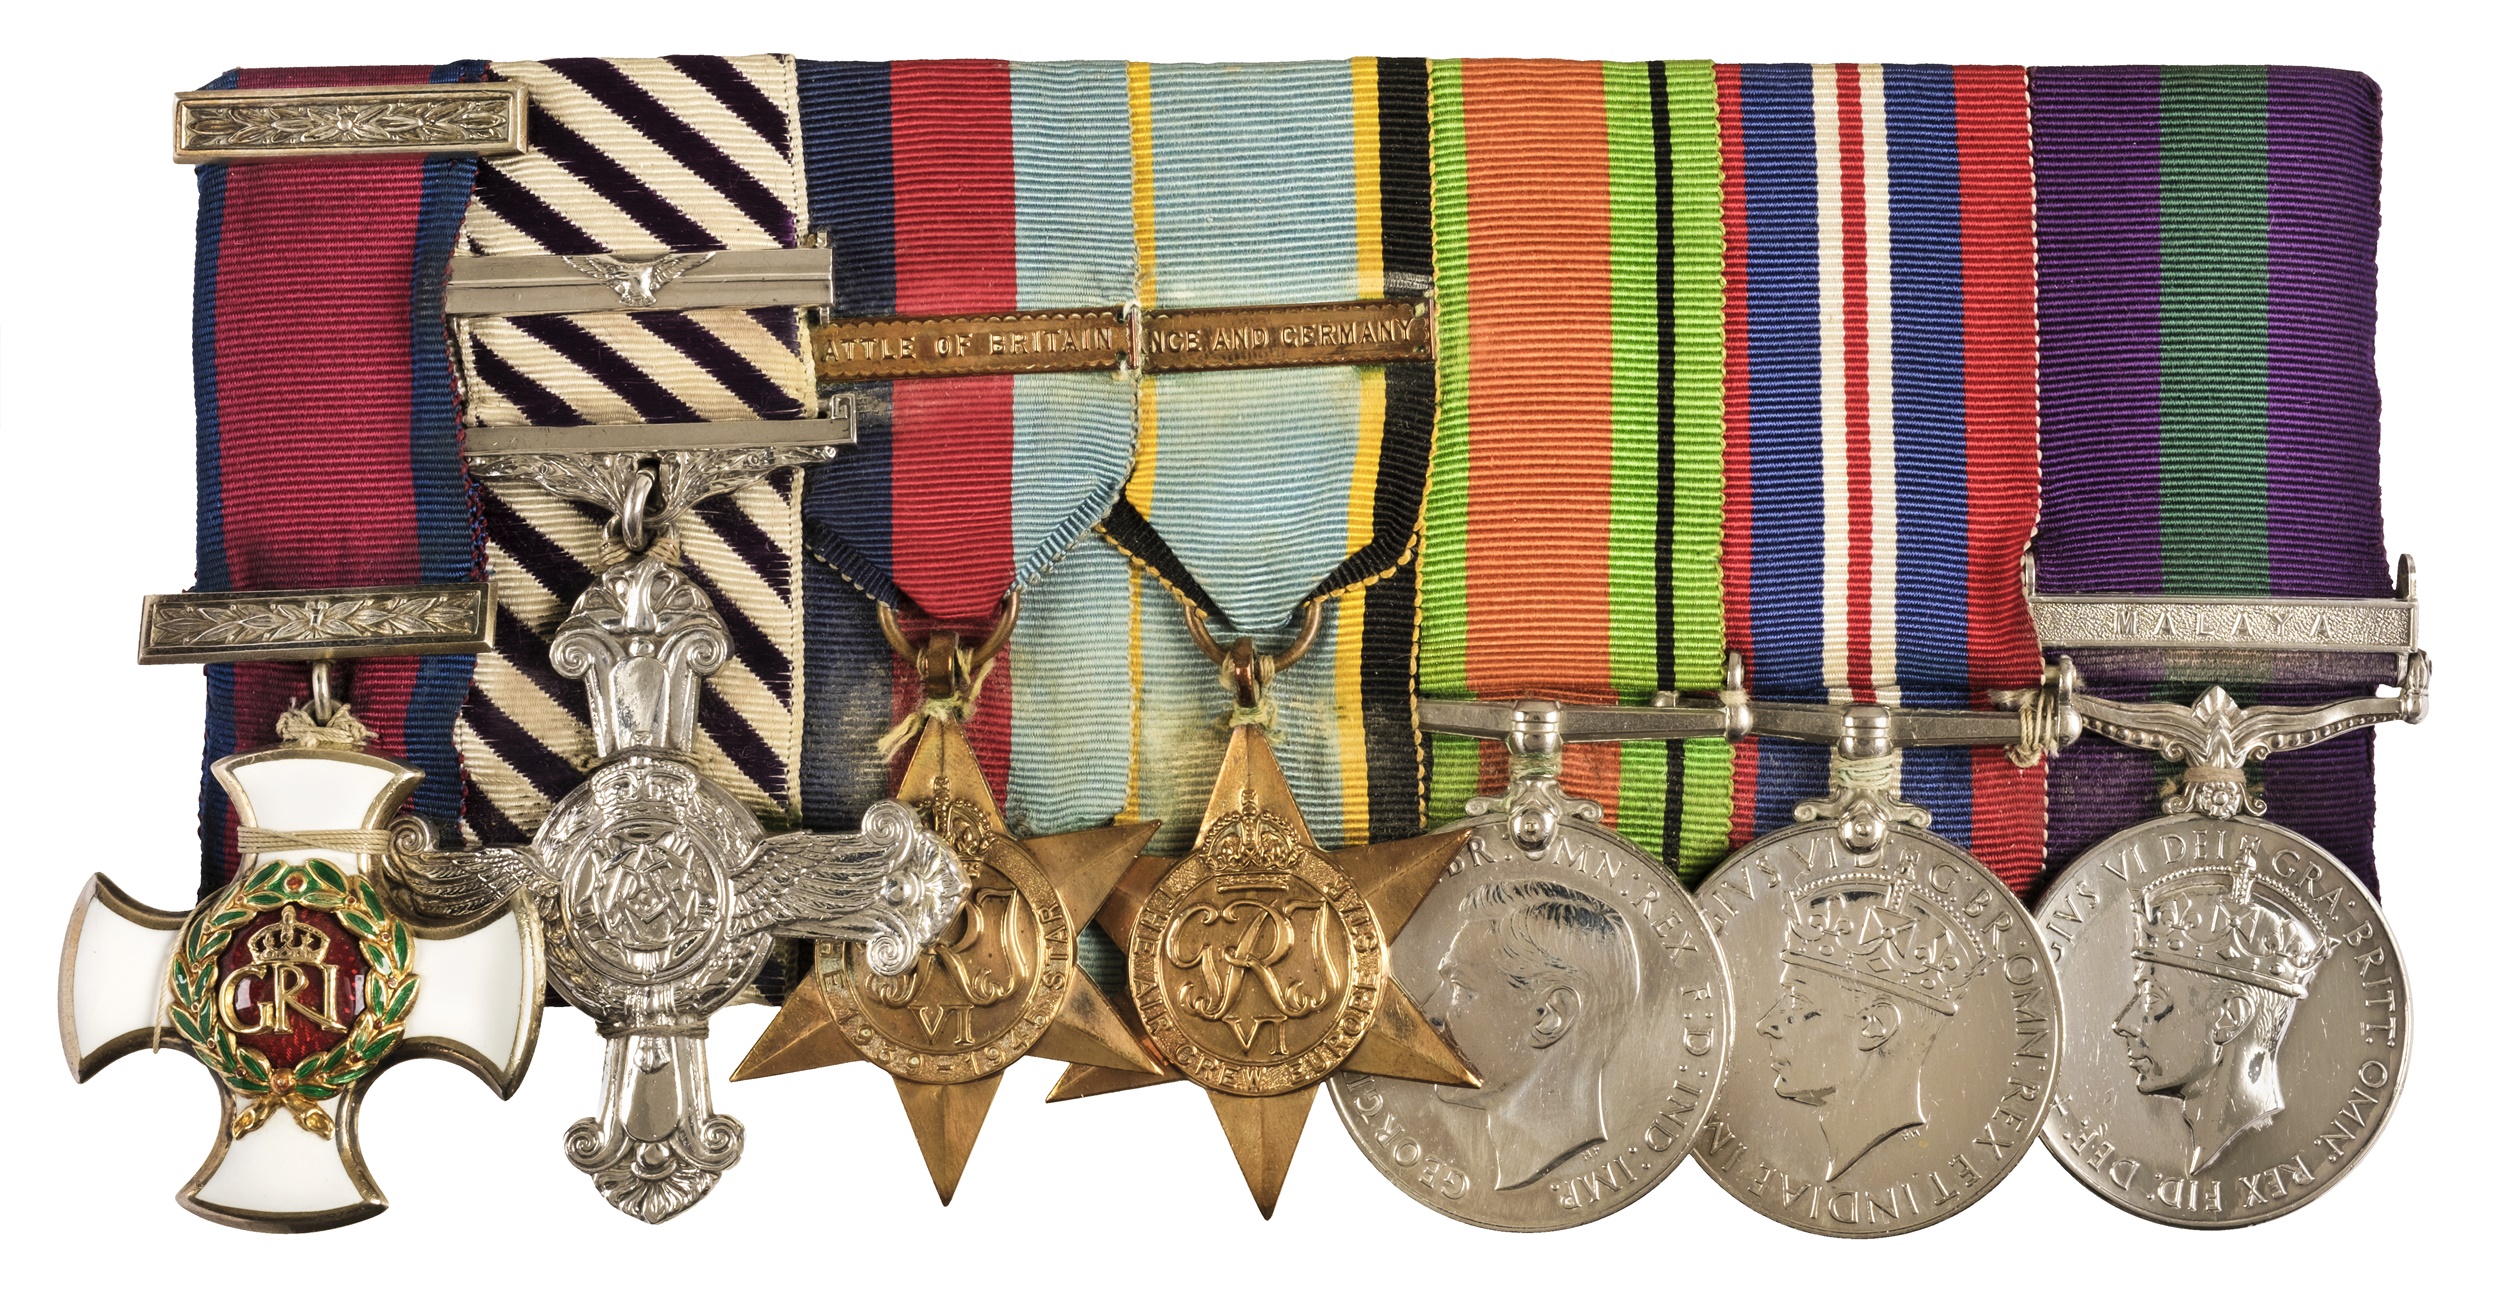 A Review of our 2021 Military & Aviation History, Medals & Militaria Sales